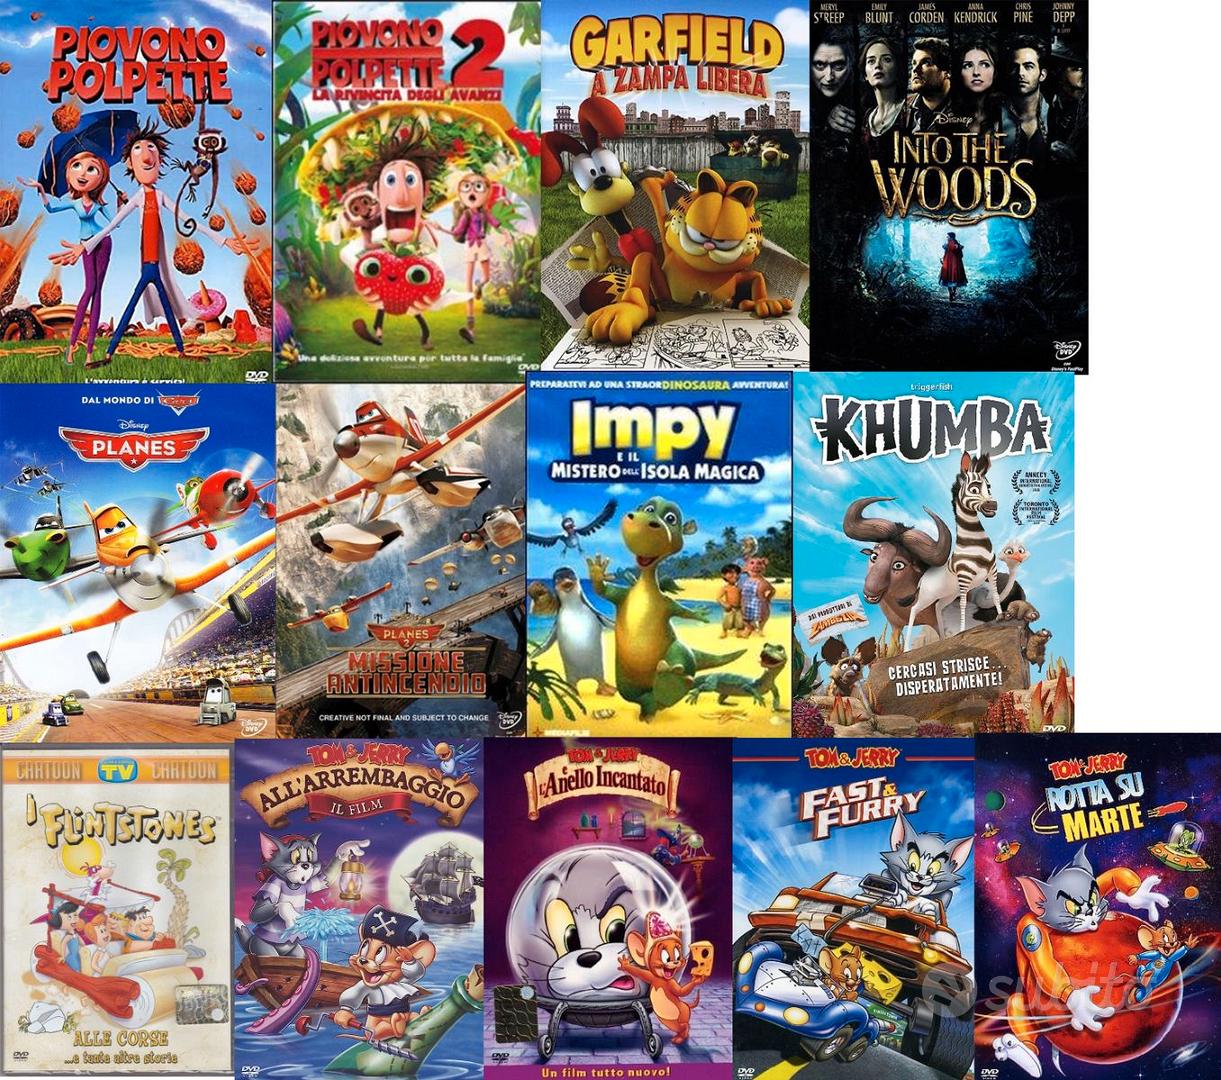 Tom e Jerry all'arrembaggio - Movies on Google Play